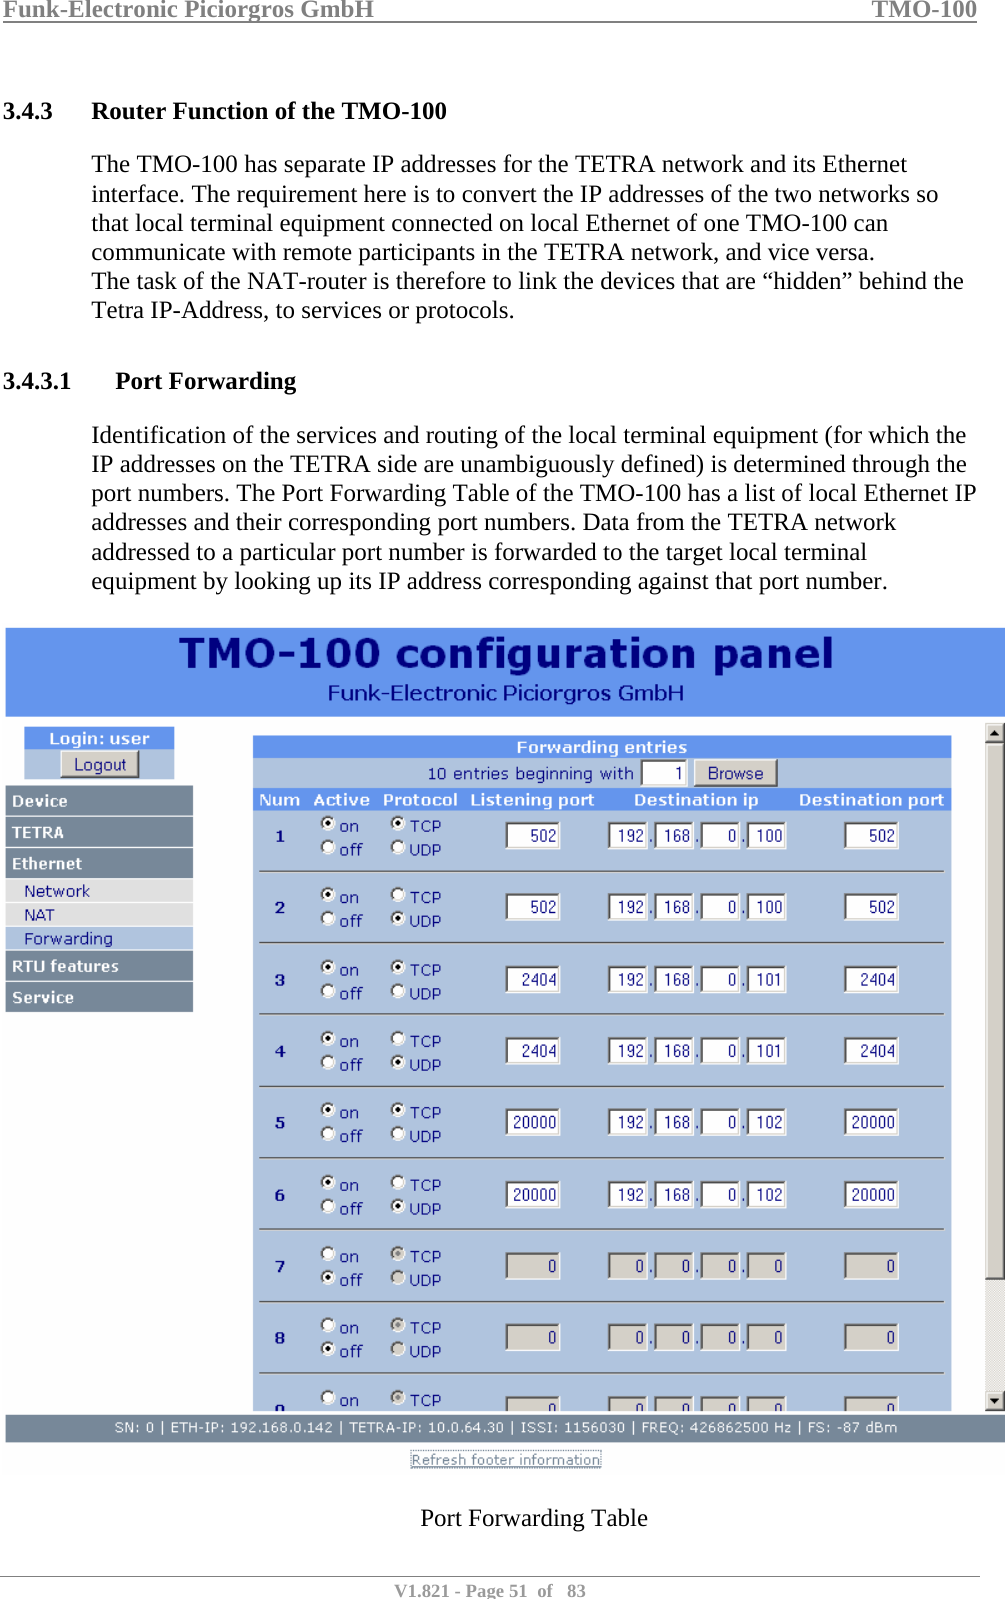 Funk-Electronic Piciorgros GmbH   TMO-100   V1.821 - Page 51  of   83   3.4.3 Router Function of the TMO-100 The TMO-100 has separate IP addresses for the TETRA network and its Ethernet interface. The requirement here is to convert the IP addresses of the two networks so that local terminal equipment connected on local Ethernet of one TMO-100 can communicate with remote participants in the TETRA network, and vice versa.  The task of the NAT-router is therefore to link the devices that are “hidden” behind the Tetra IP-Address, to services or protocols.  3.4.3.1 Port Forwarding Identification of the services and routing of the local terminal equipment (for which the IP addresses on the TETRA side are unambiguously defined) is determined through the port numbers. The Port Forwarding Table of the TMO-100 has a list of local Ethernet IP addresses and their corresponding port numbers. Data from the TETRA network addressed to a particular port number is forwarded to the target local terminal equipment by looking up its IP address corresponding against that port number.    Port Forwarding Table 